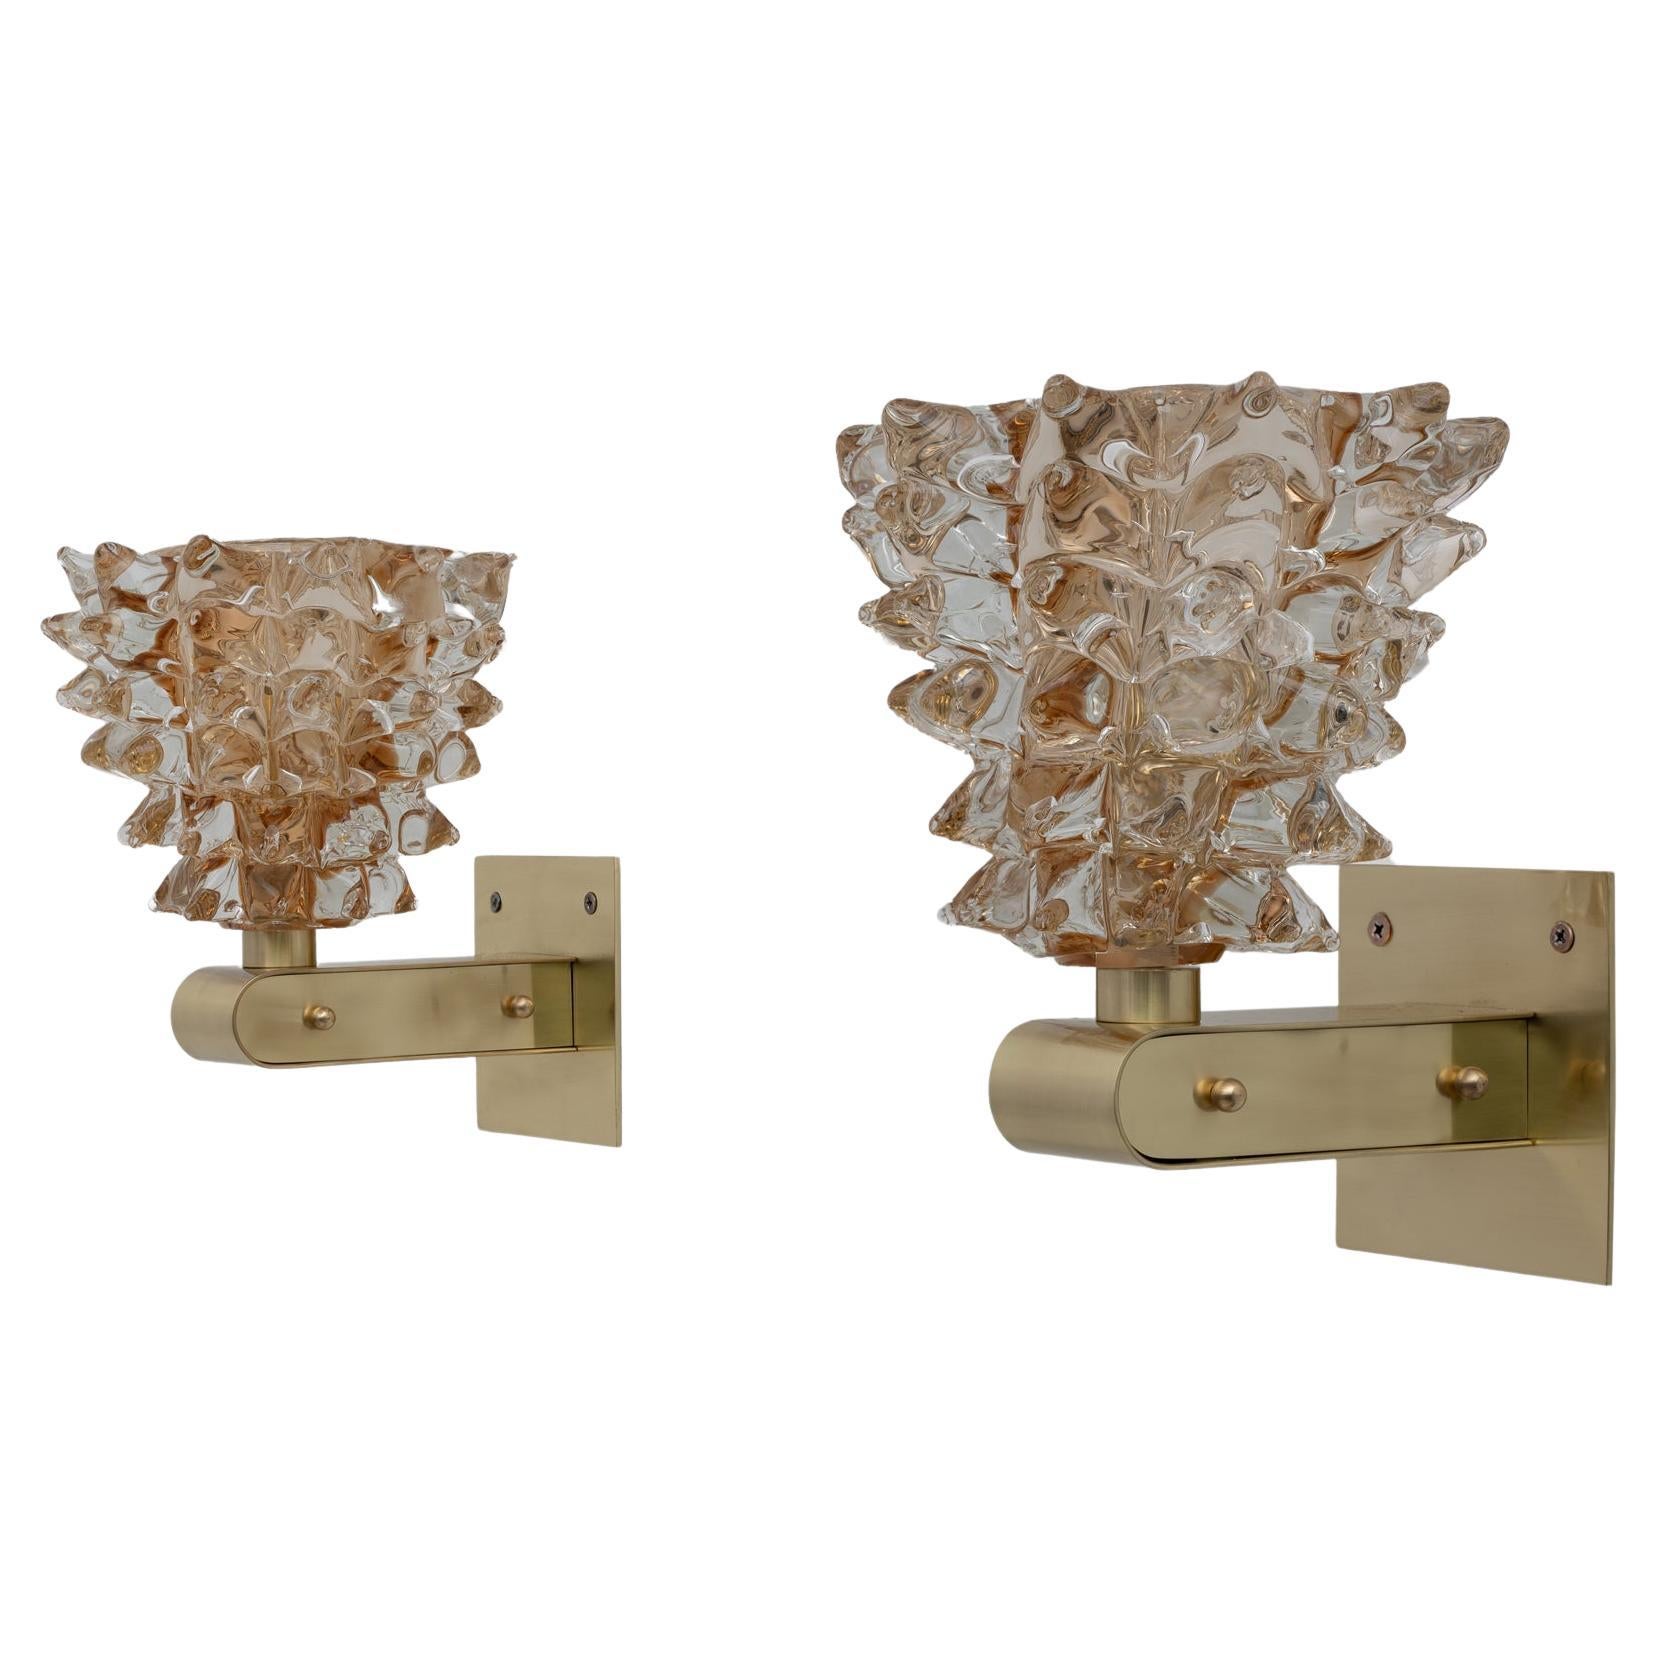 Barovier & Toso Art Dèco Style Brass and Rostrato Murano Glass Sconces, Pair For Sale